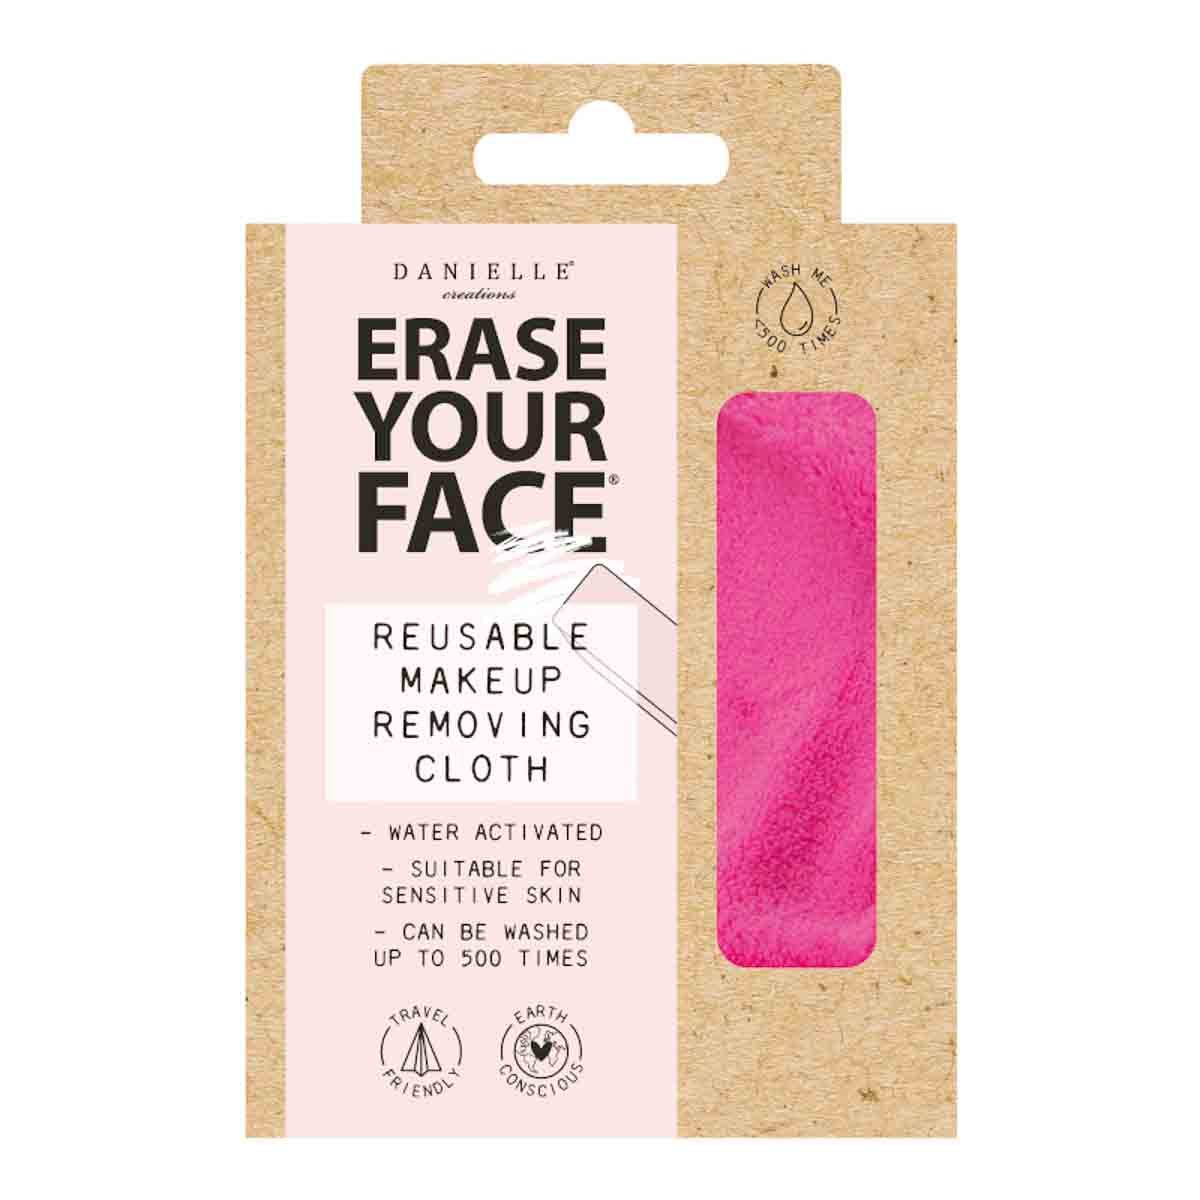 Danielle Creations Erase Your Face Makeup Removing Cloth - Pink